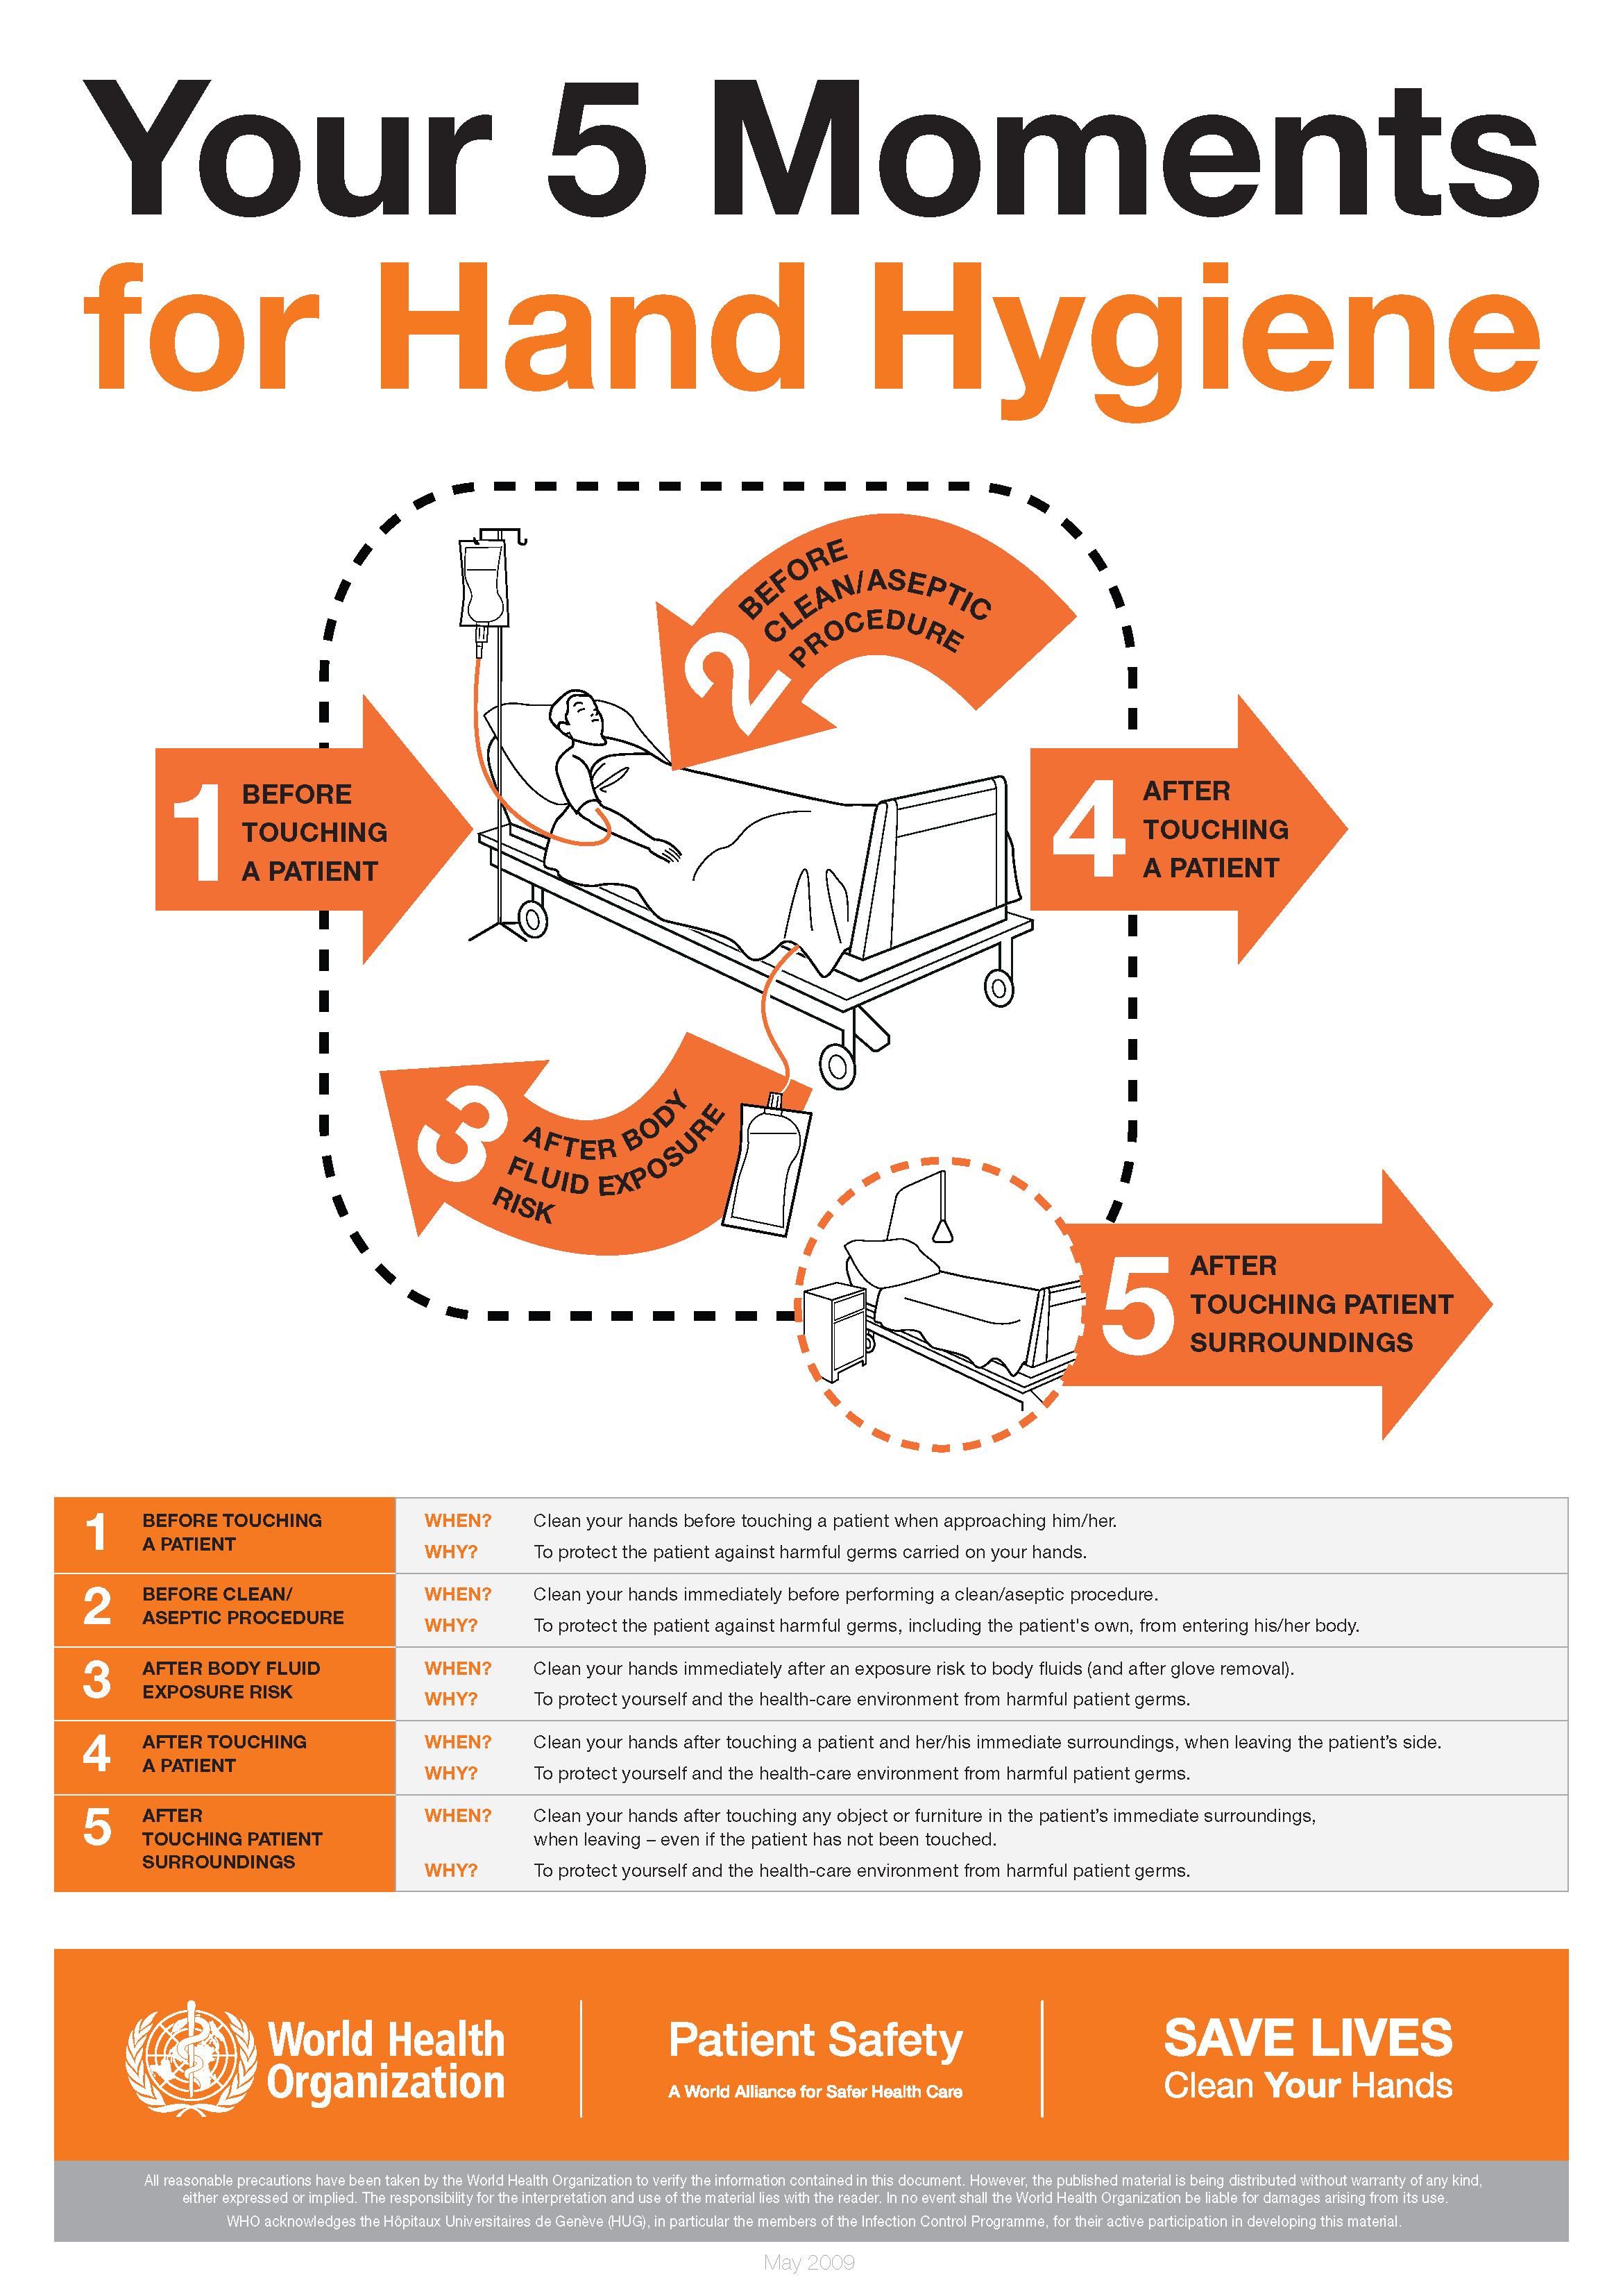 poster showing who 5 moments for hand hygiene